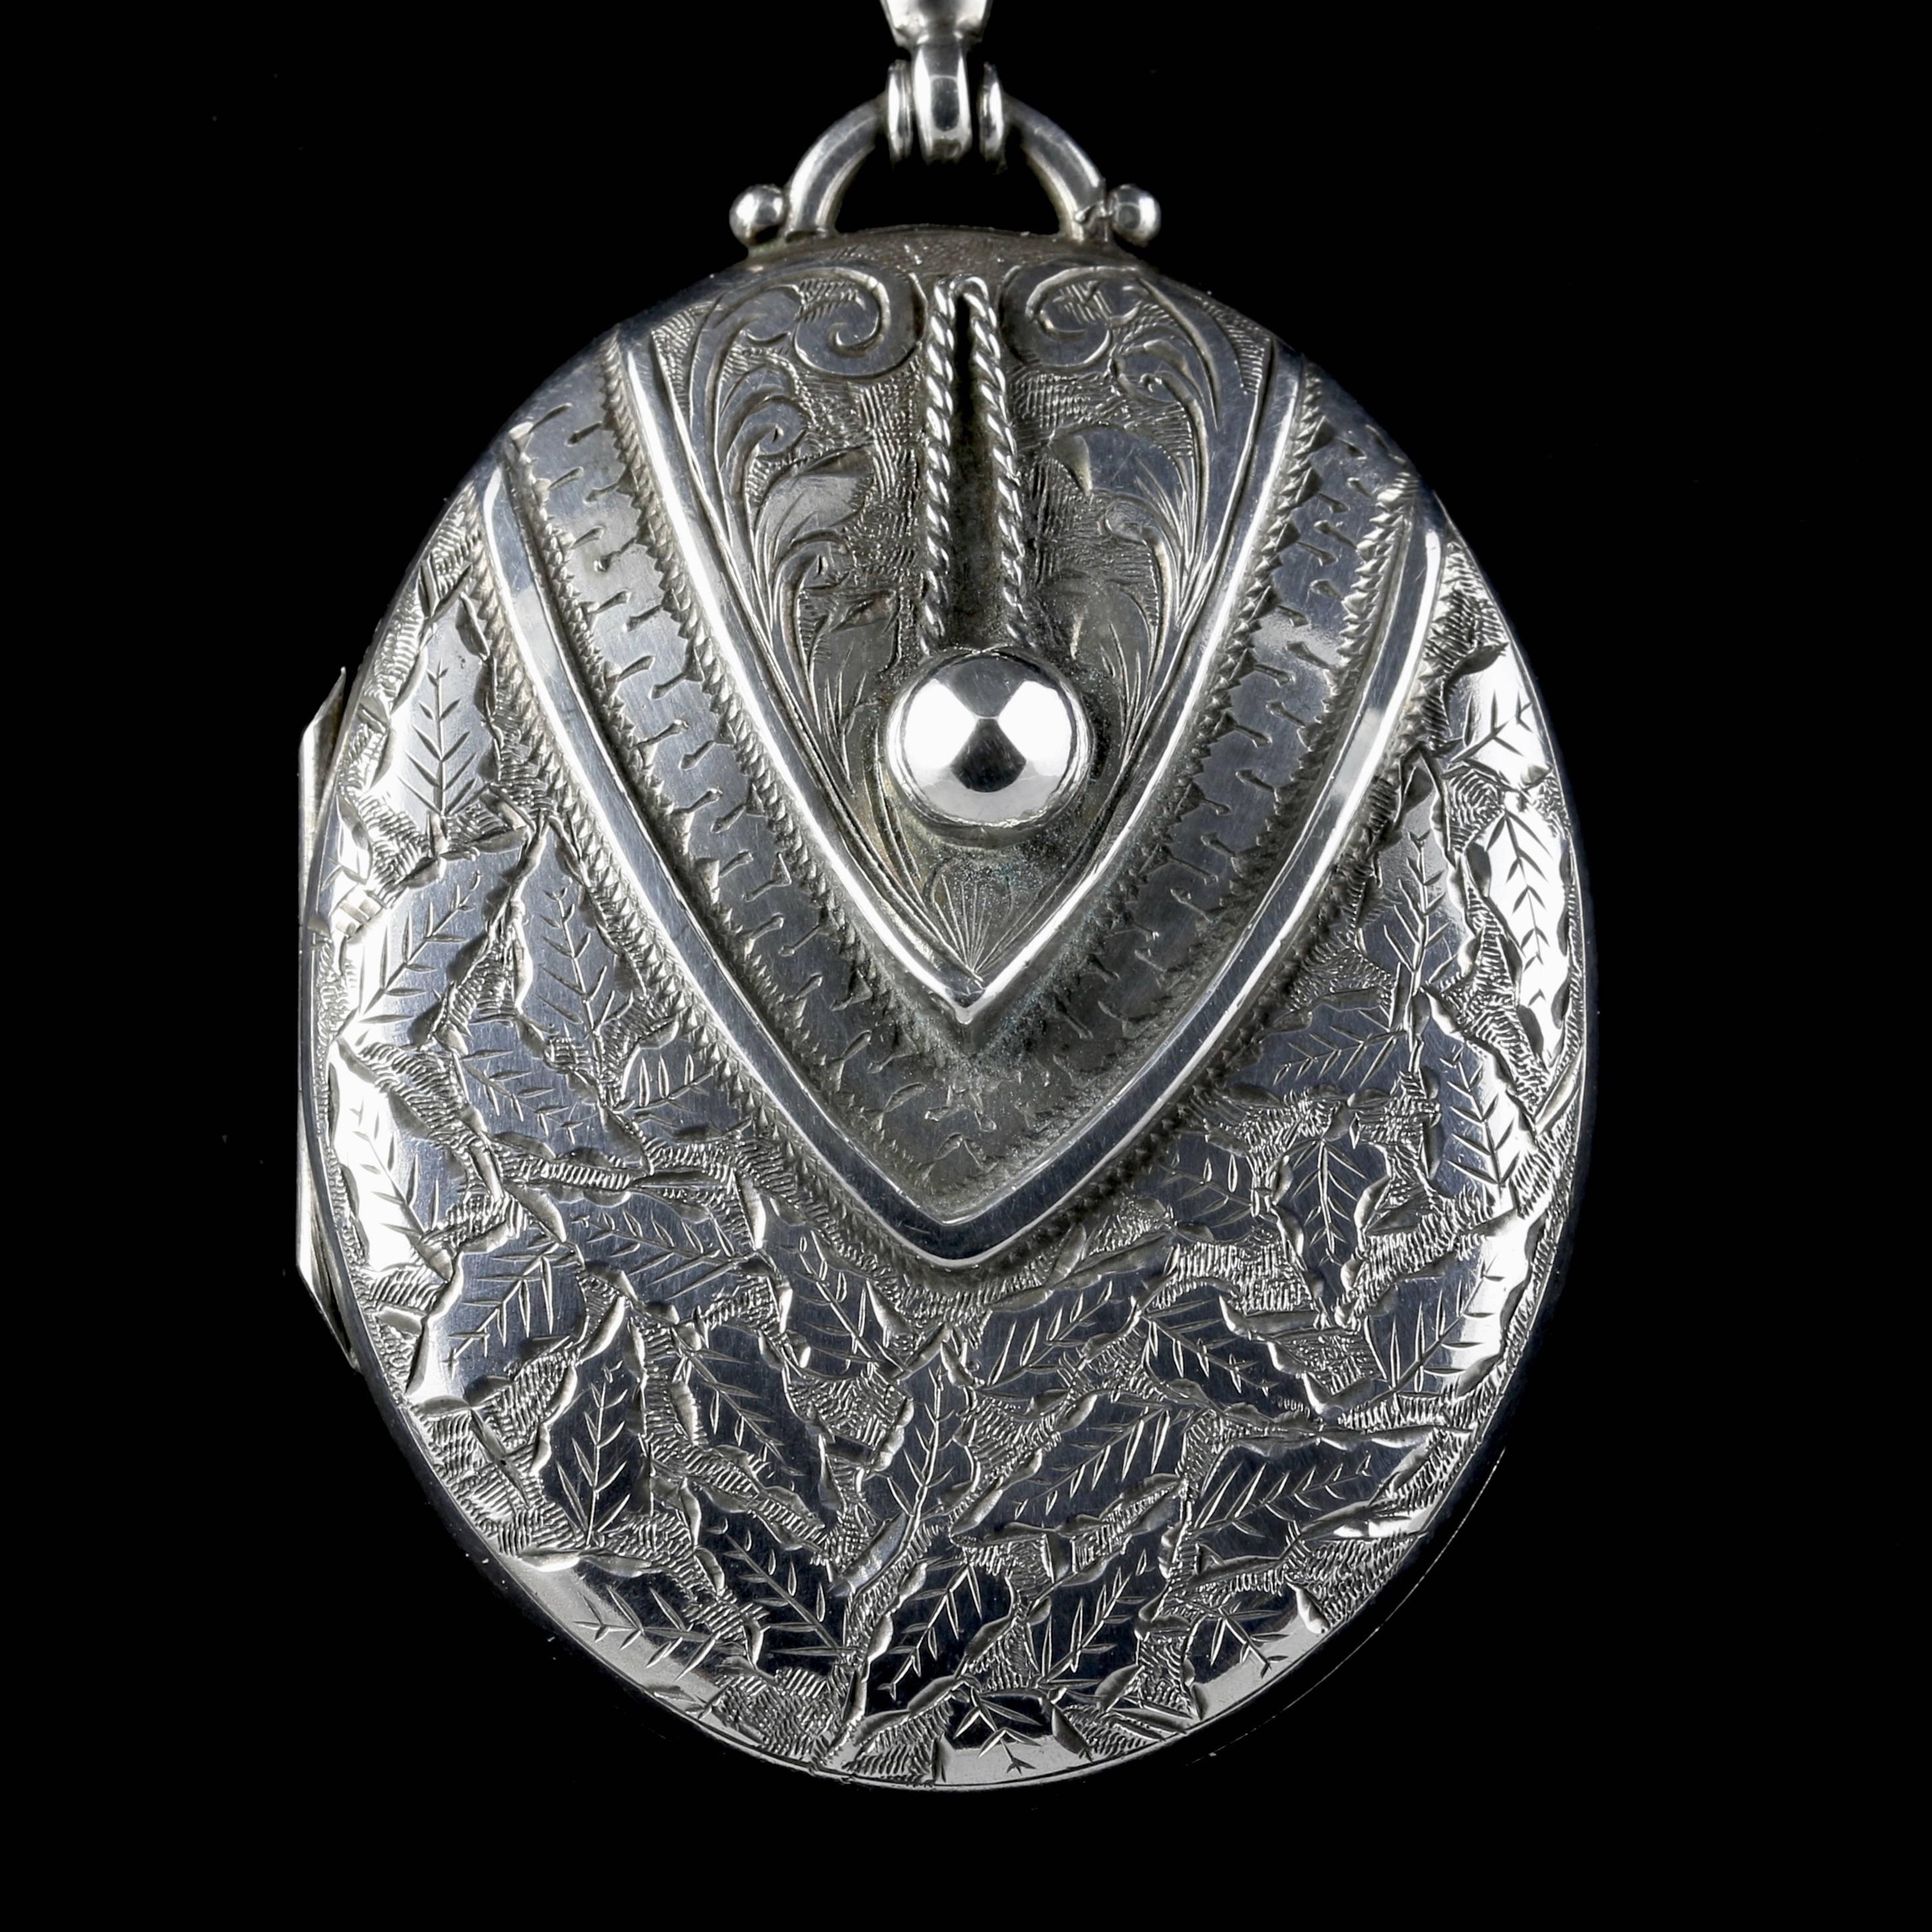 This wonderful sterling silver Victorian Collar and Locket is dated Birmingham 1880-1881

This lovely locket and collar boasts stunning workmanship of its time, and fully hallmarked too on the reverse of the locket.

The collar has a lovely smooth